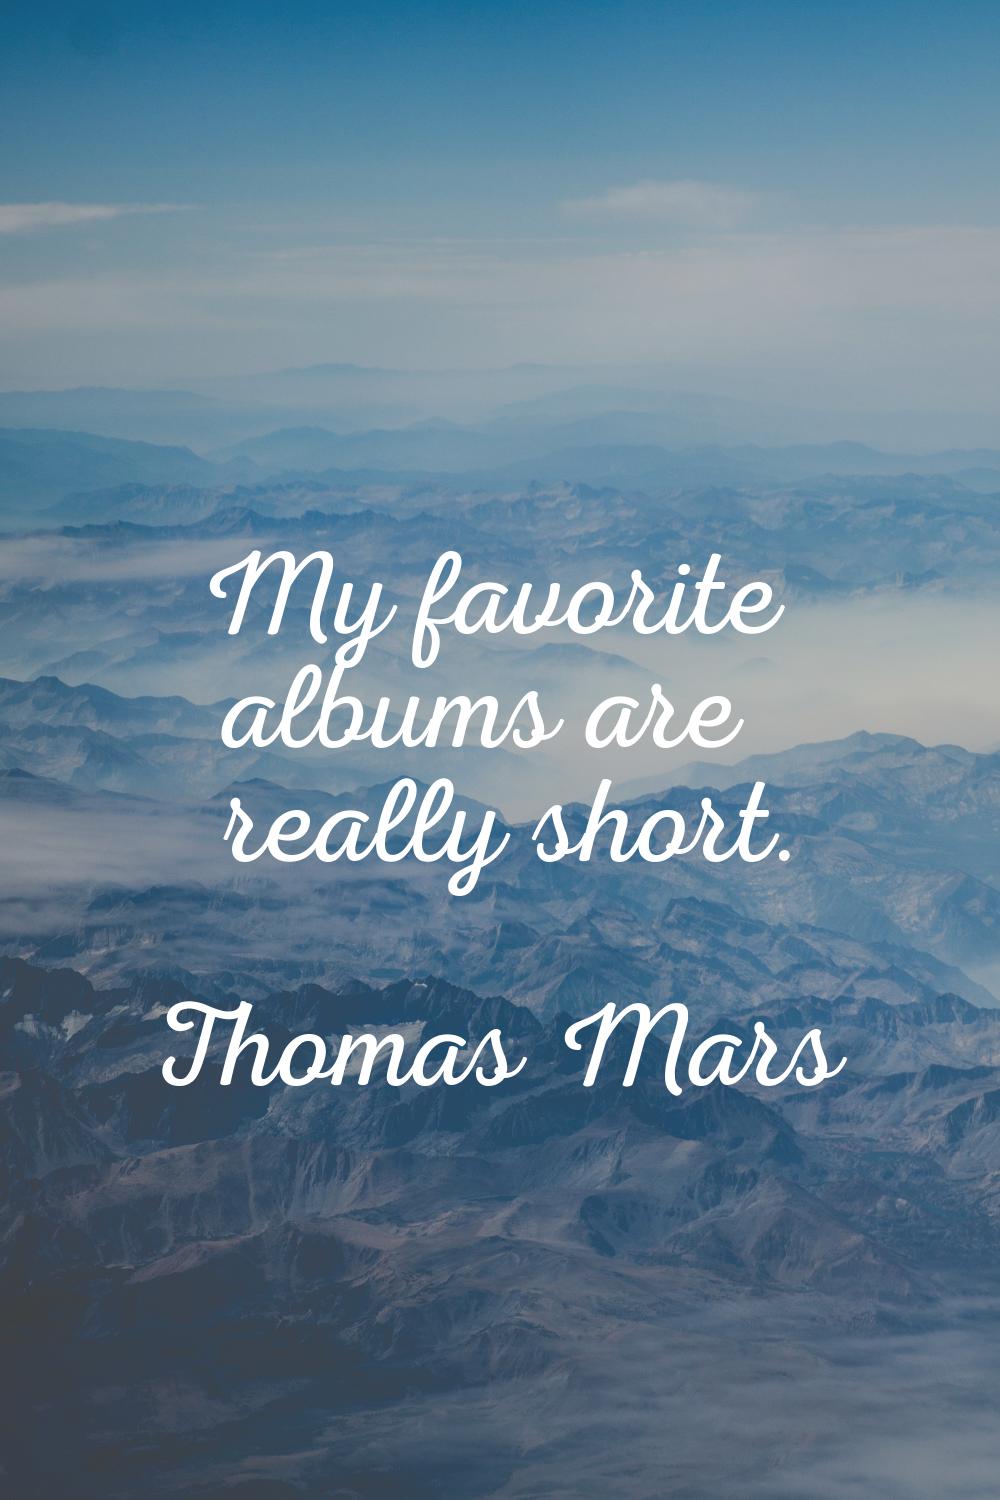 My favorite albums are really short.